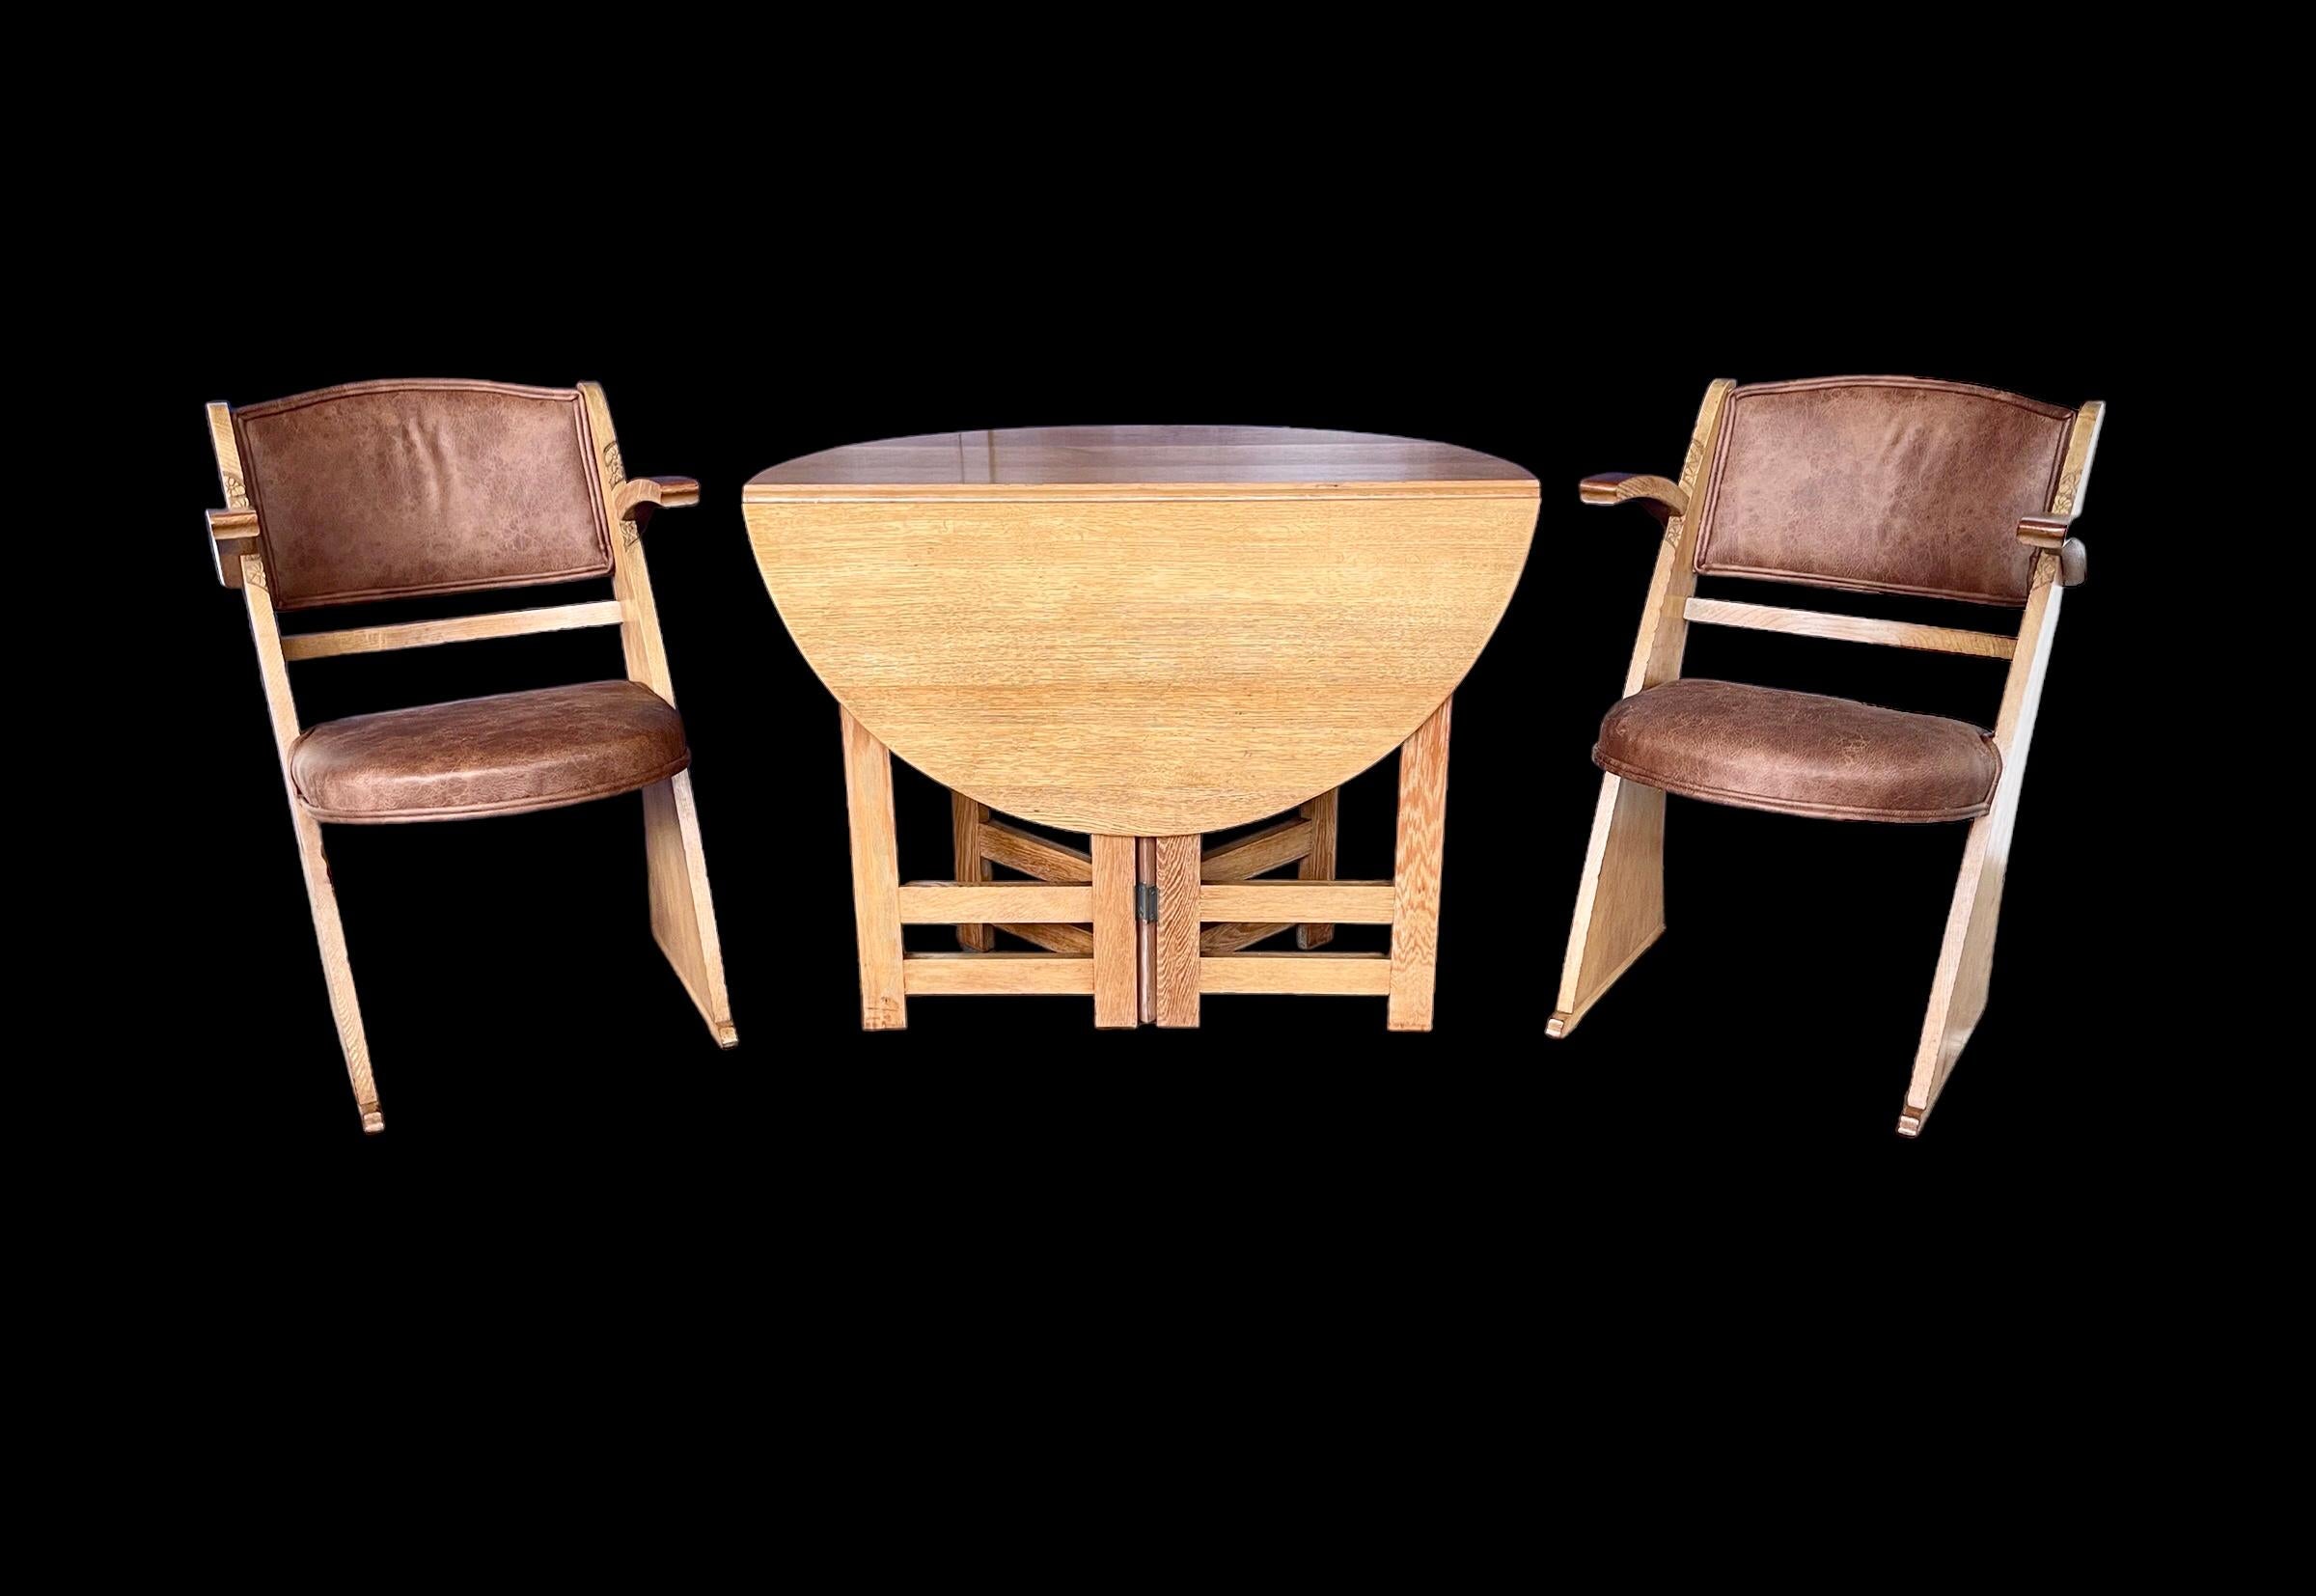 A ‘New Cromwell oak’ dining suite designed by E Gomme based in High Wycombe, each chair stamped with the registered number 778034. Comprising a drawer-leaf dining table, 2 dining chairs & 2 carvers, each with an arched authentic looking leather